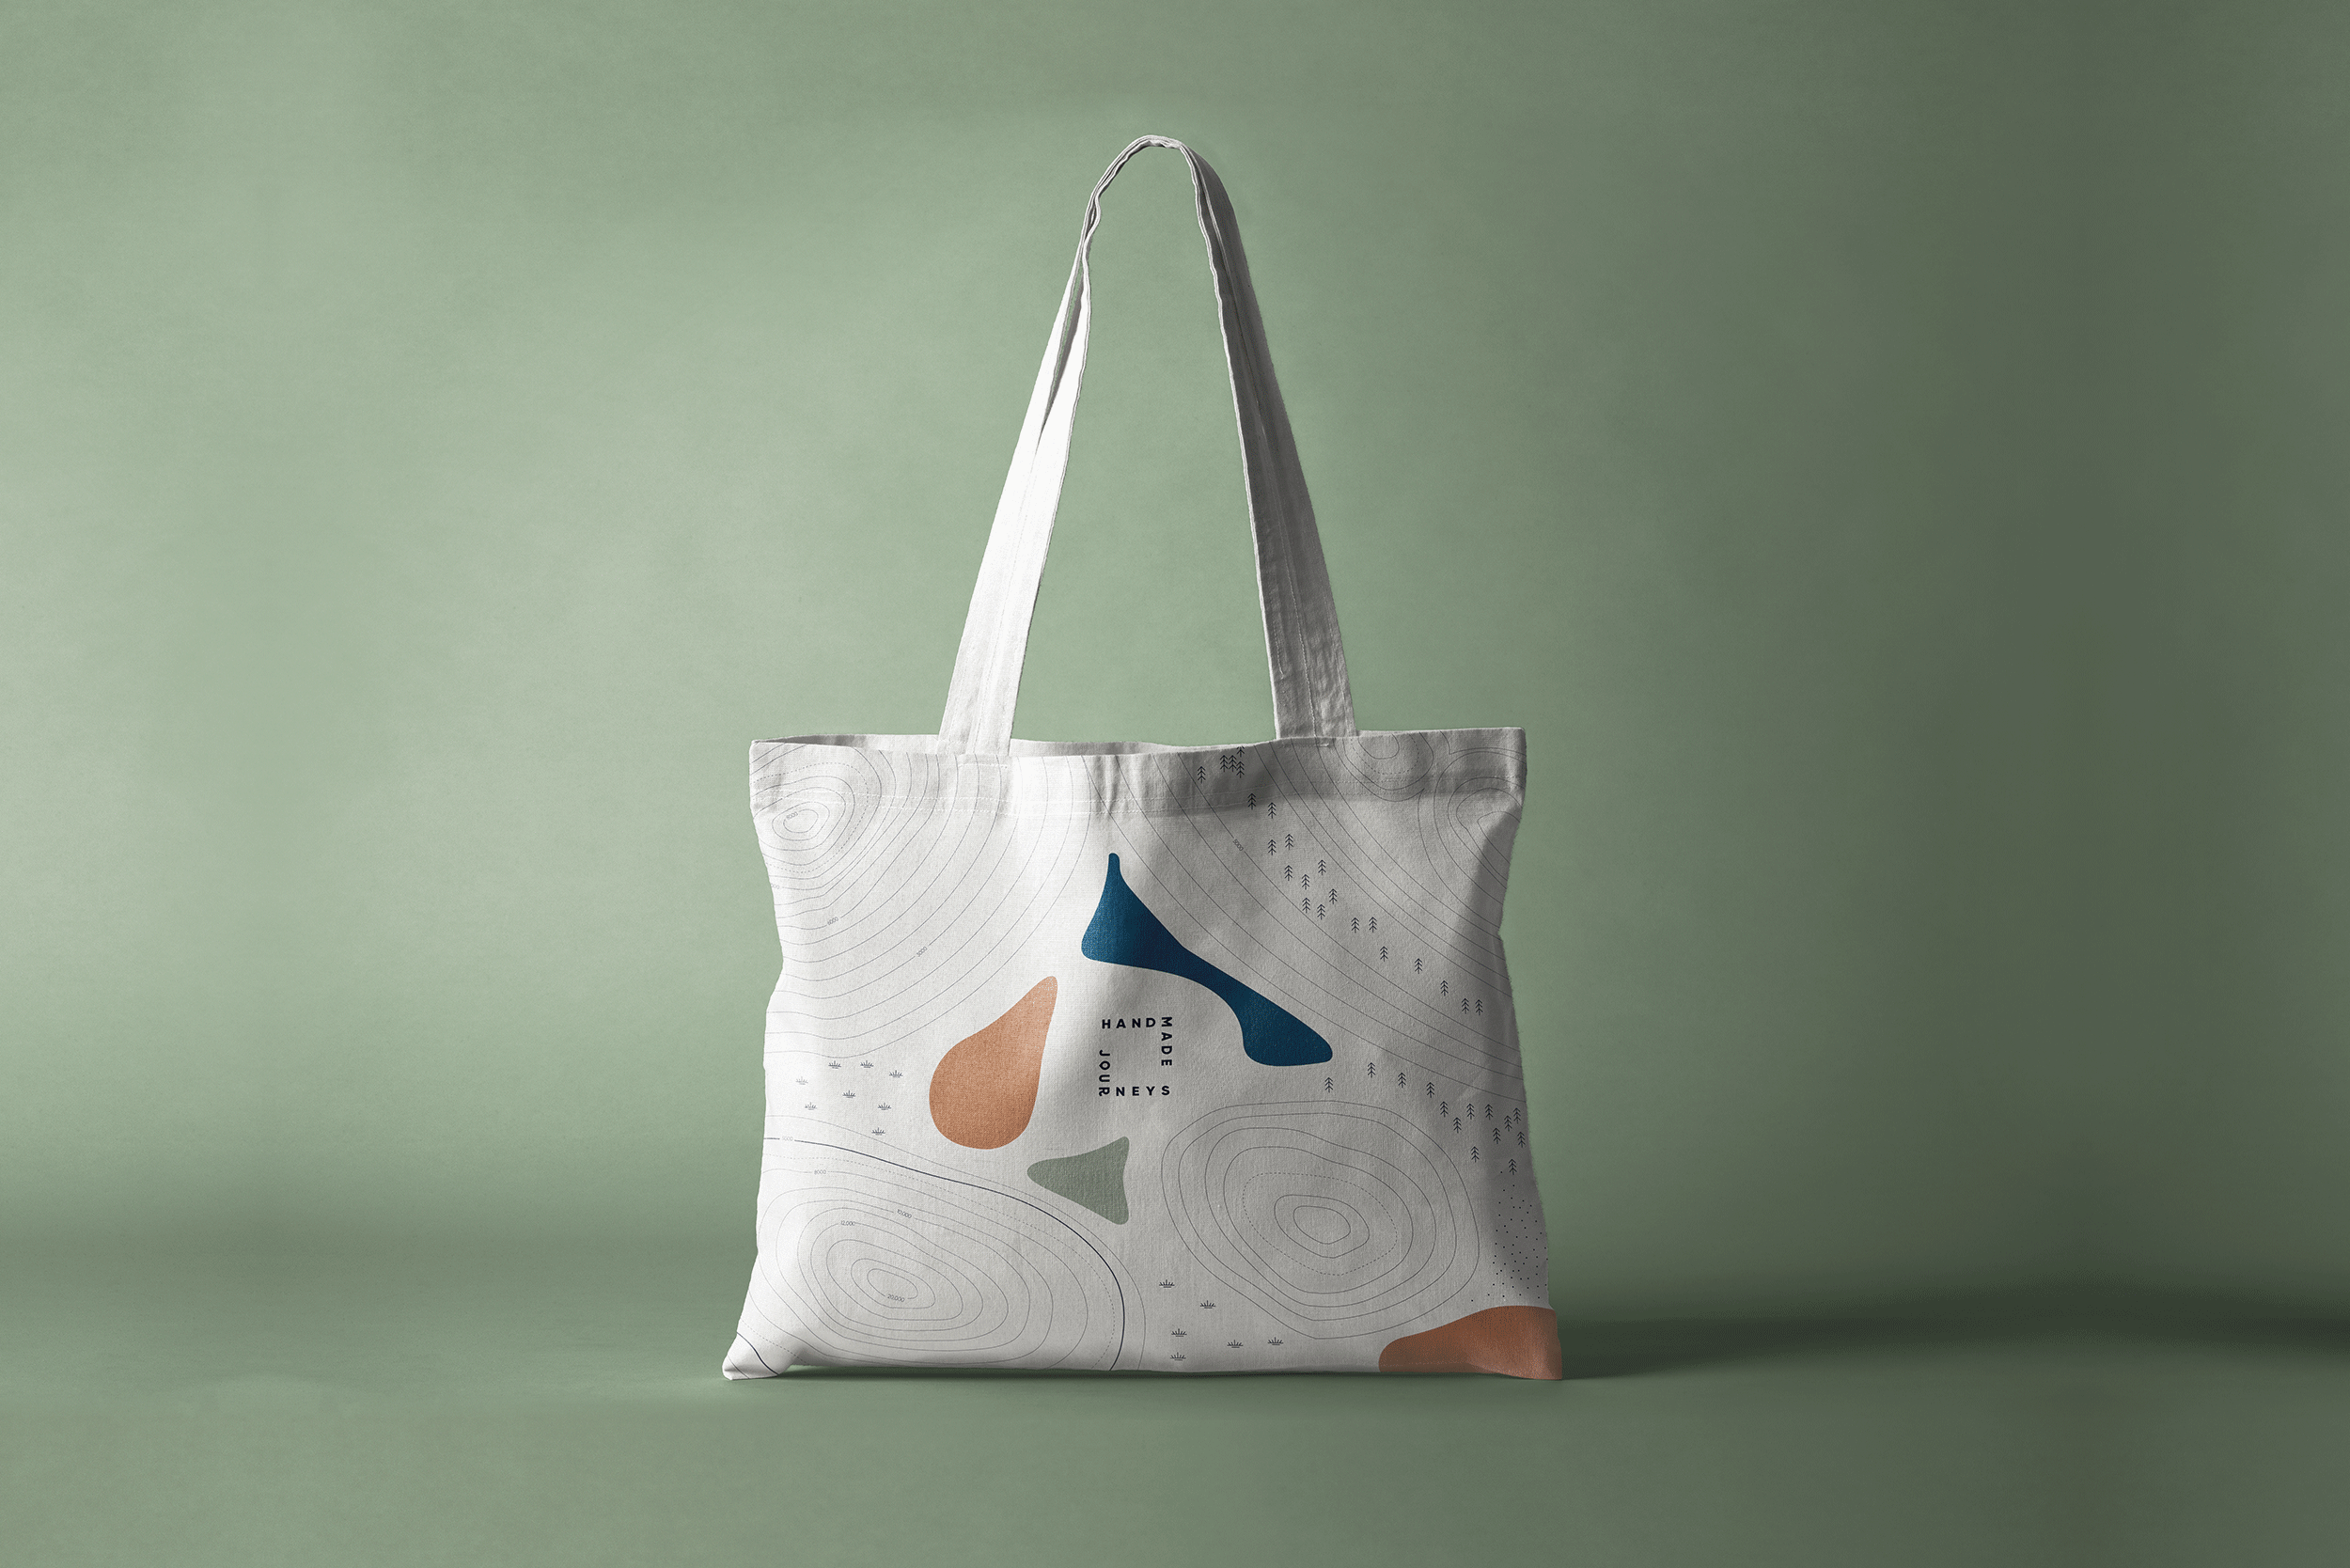 6 Sustainable Beach Bags For Seaside Escapes - 8Shades